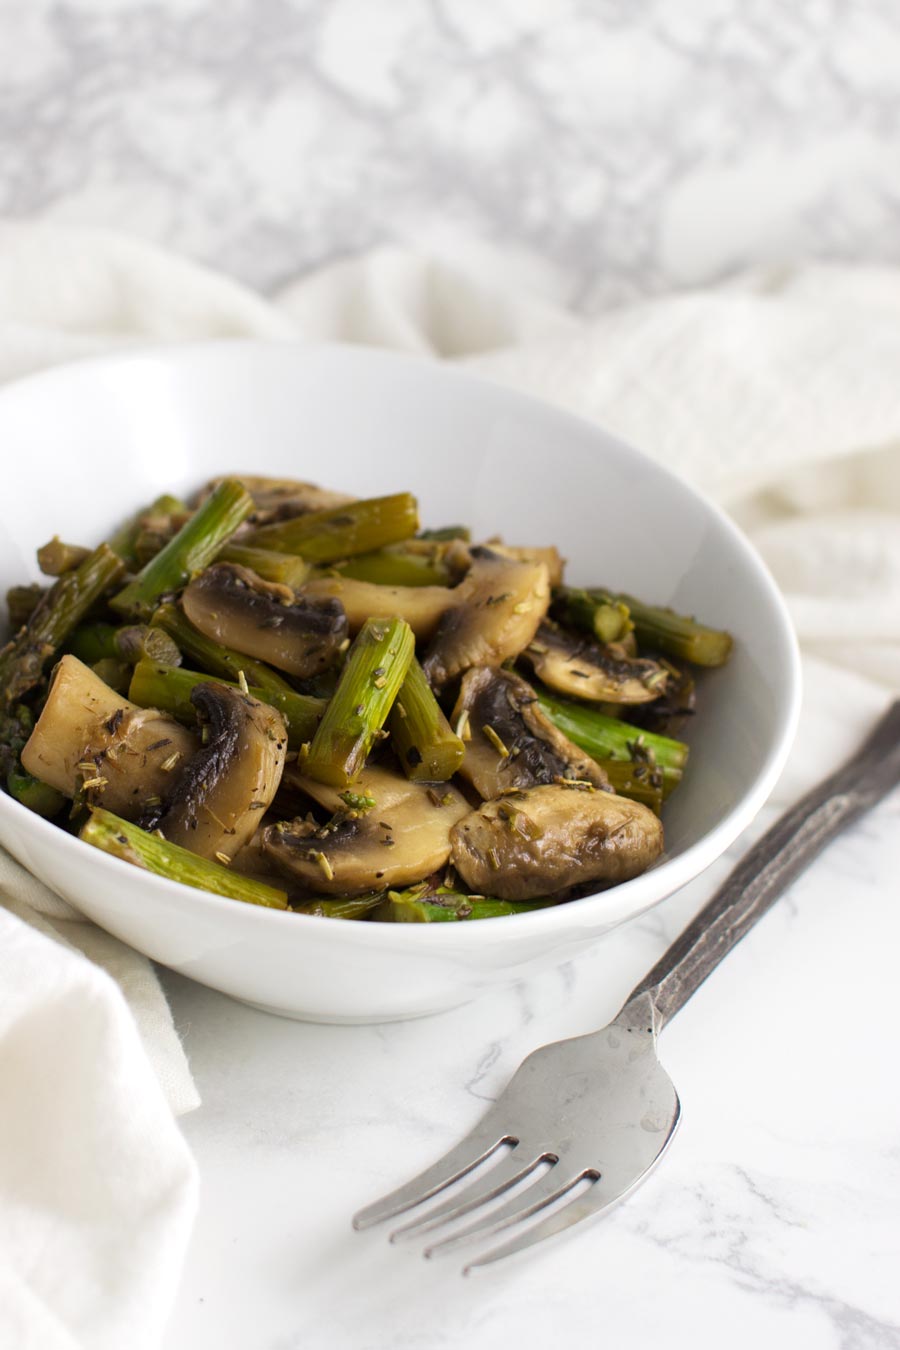 Sweet and Sour Asparagus Stir-Fry recipe from acleanplate.com #paleo #aip #glutenfree